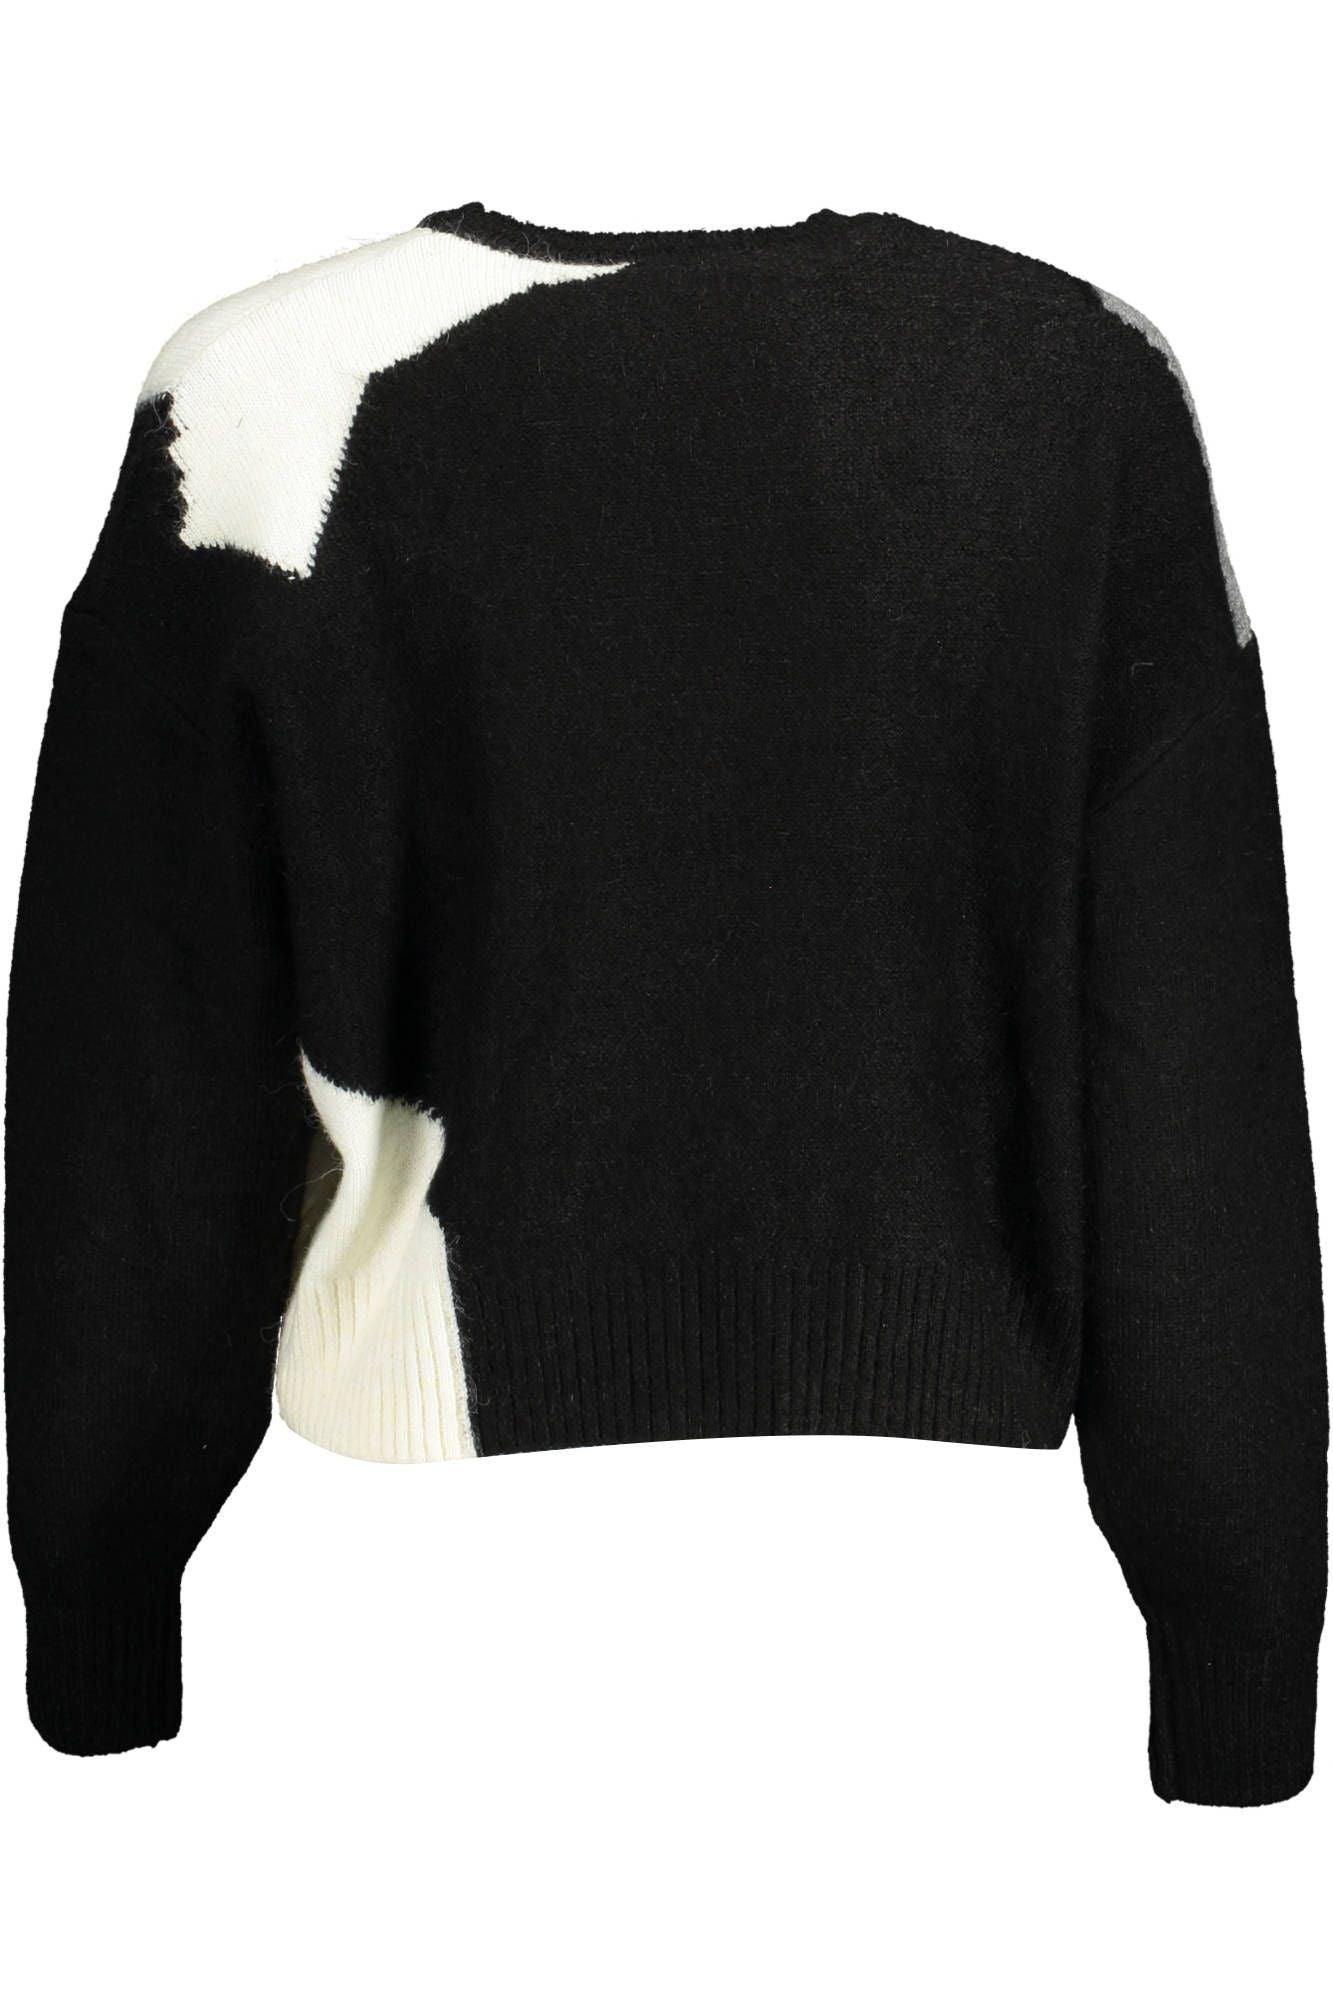 Desigual Chic Contrasting Long Sleeve Sweater - PER.FASHION